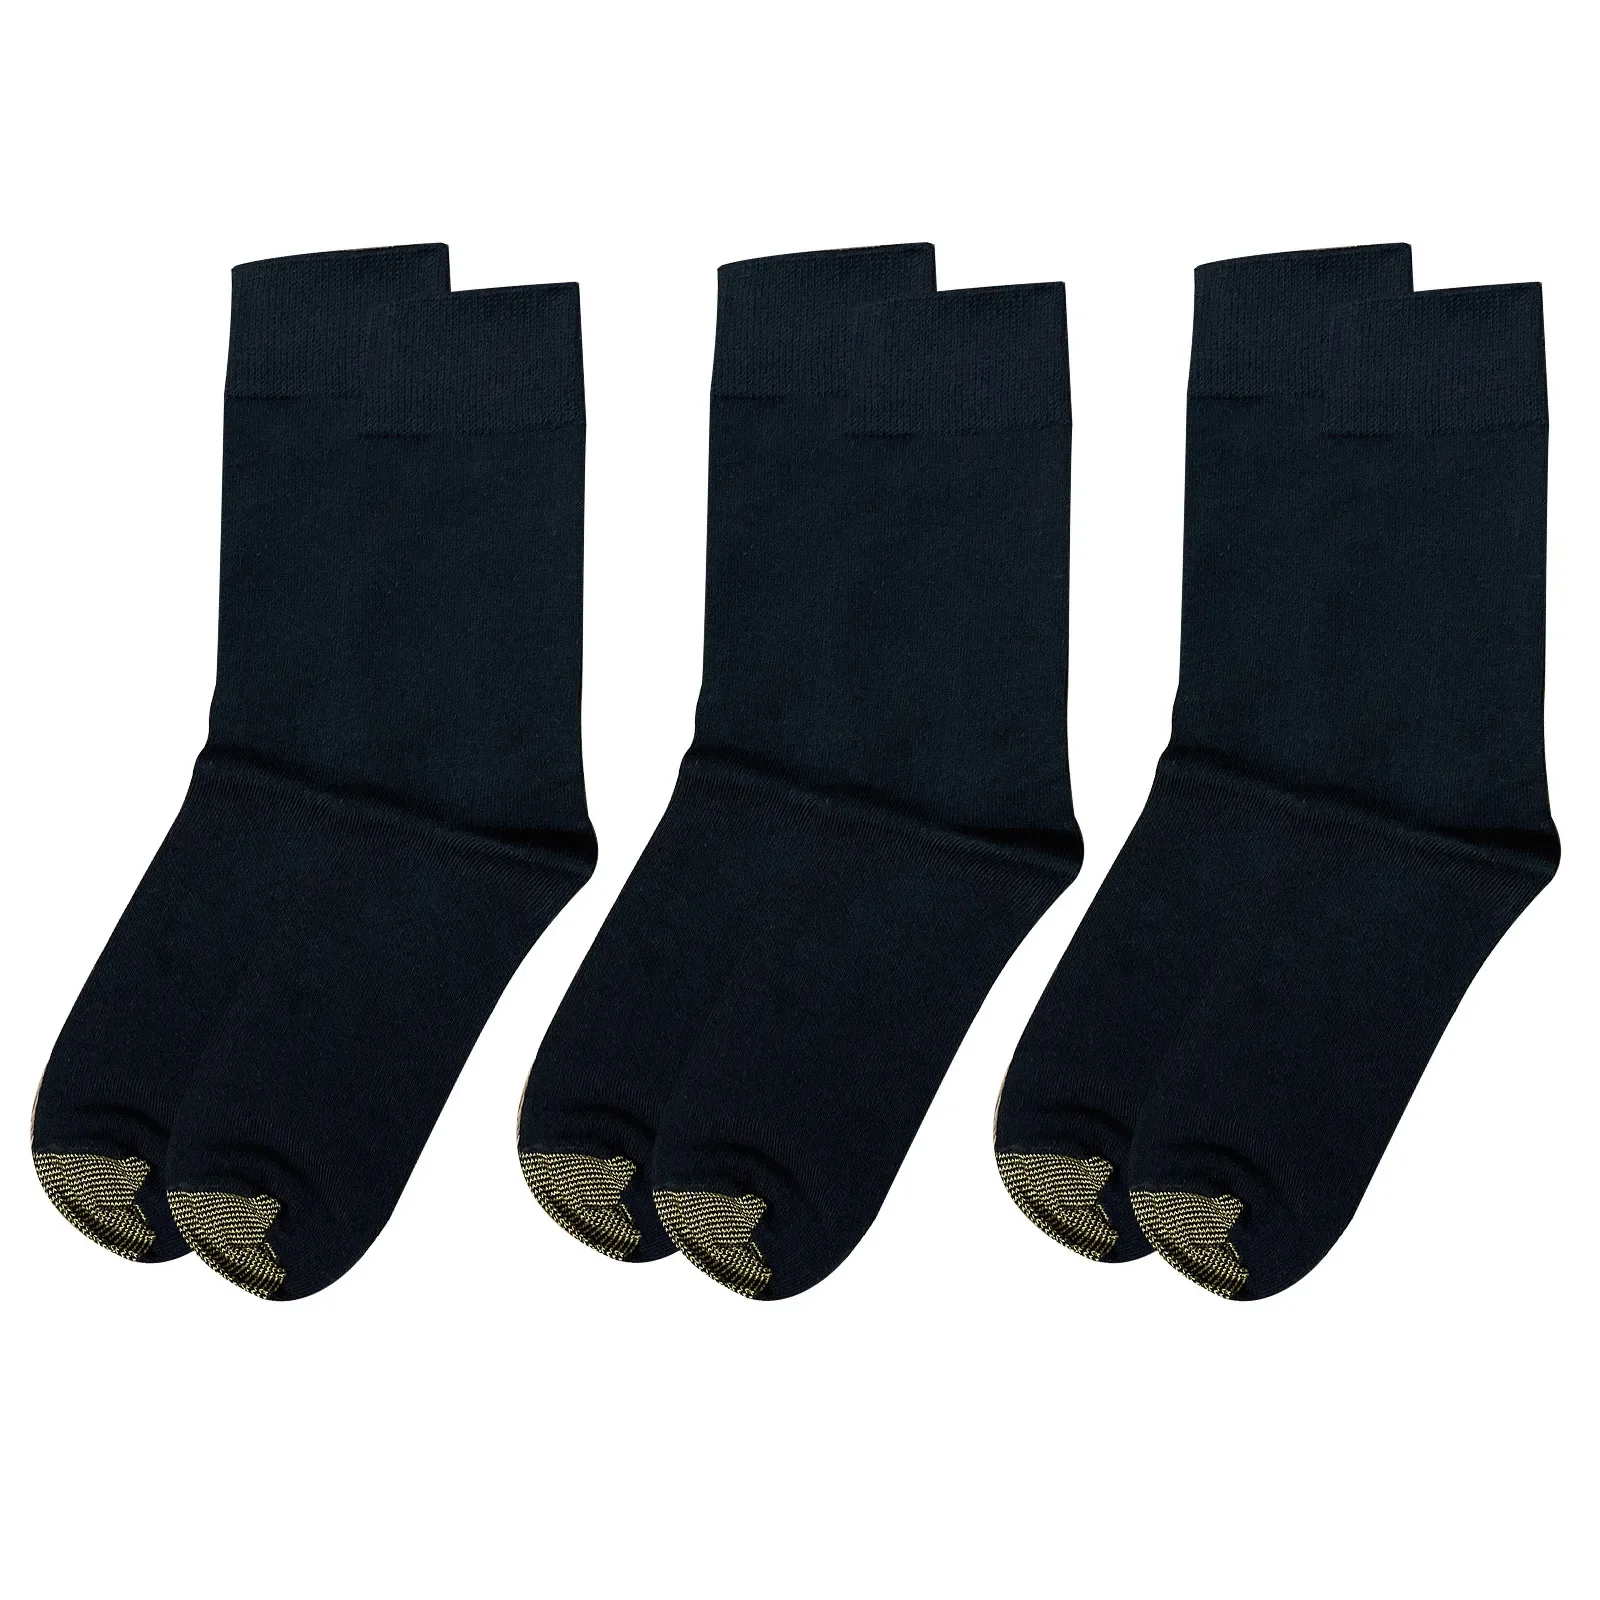 CLEVER-MENMODE 3 x Cotton Socks Men Formal Tube Sock Business Male hombre Sports Casual Soft Fashion Comfortable why i am so clever